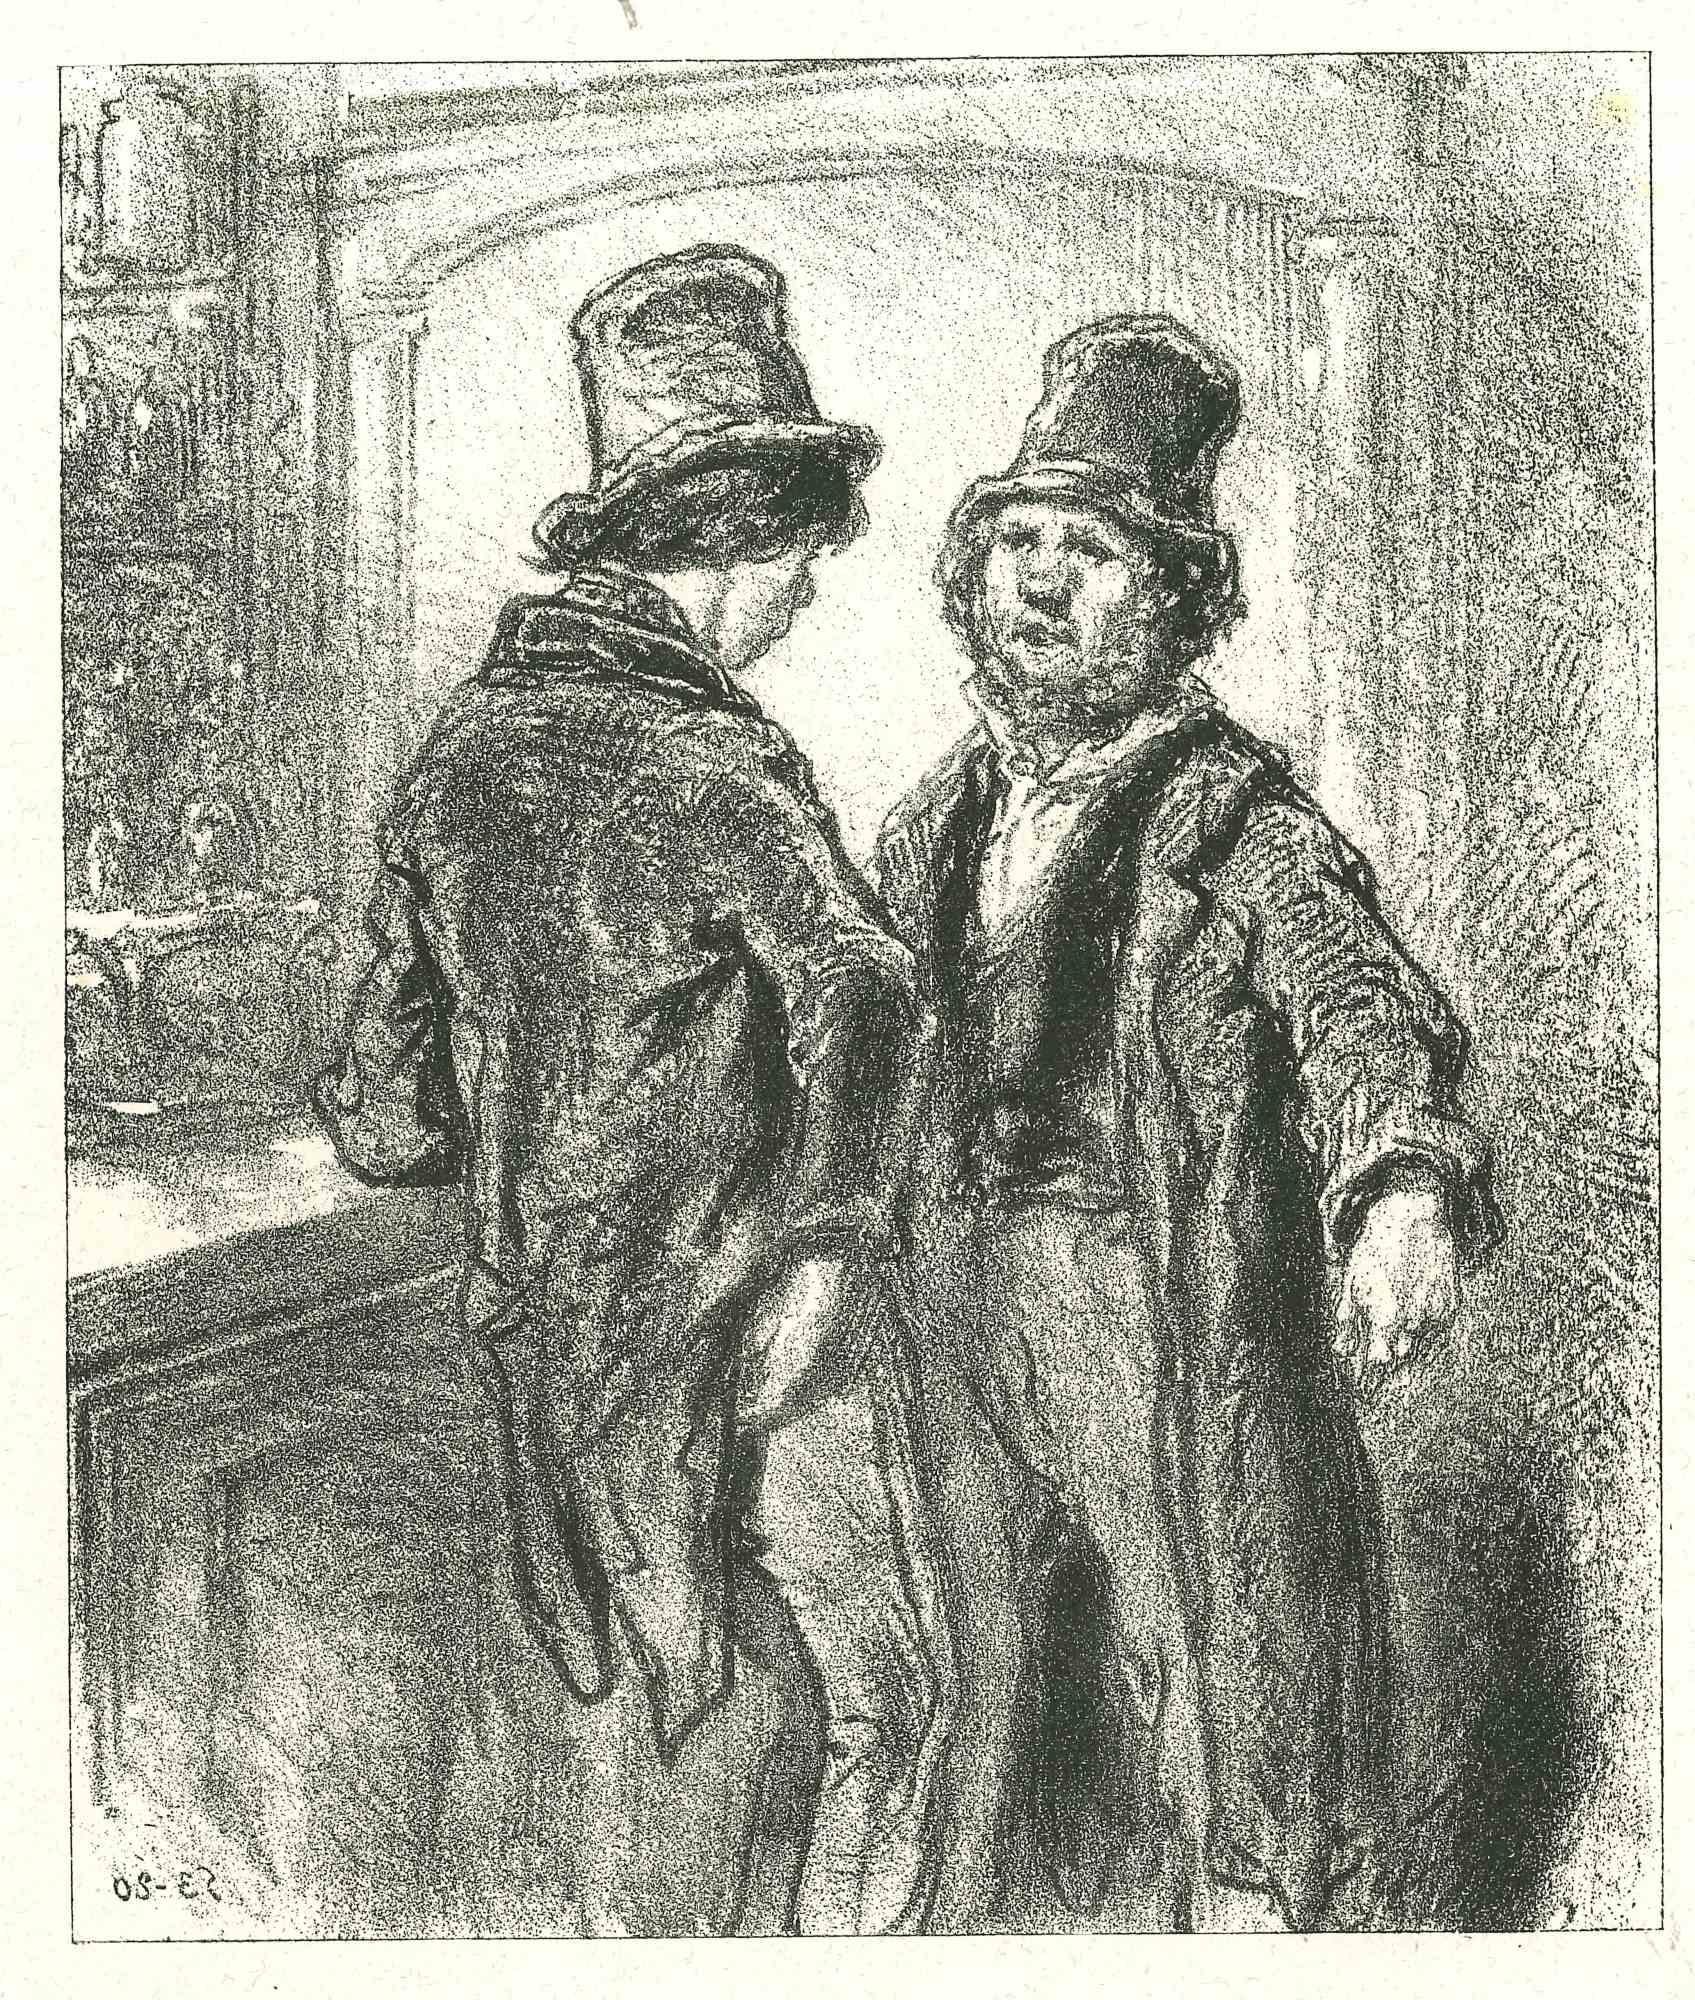 The conversation is an original lithograph artwork on ivory-colored paper, realized by the French draftsman Paul Gavarni (after) (alias Guillaume Sulpice Chevalier Gavarni, 1804-1866) in Paris, 1881, in the collection of Illustrations for "La